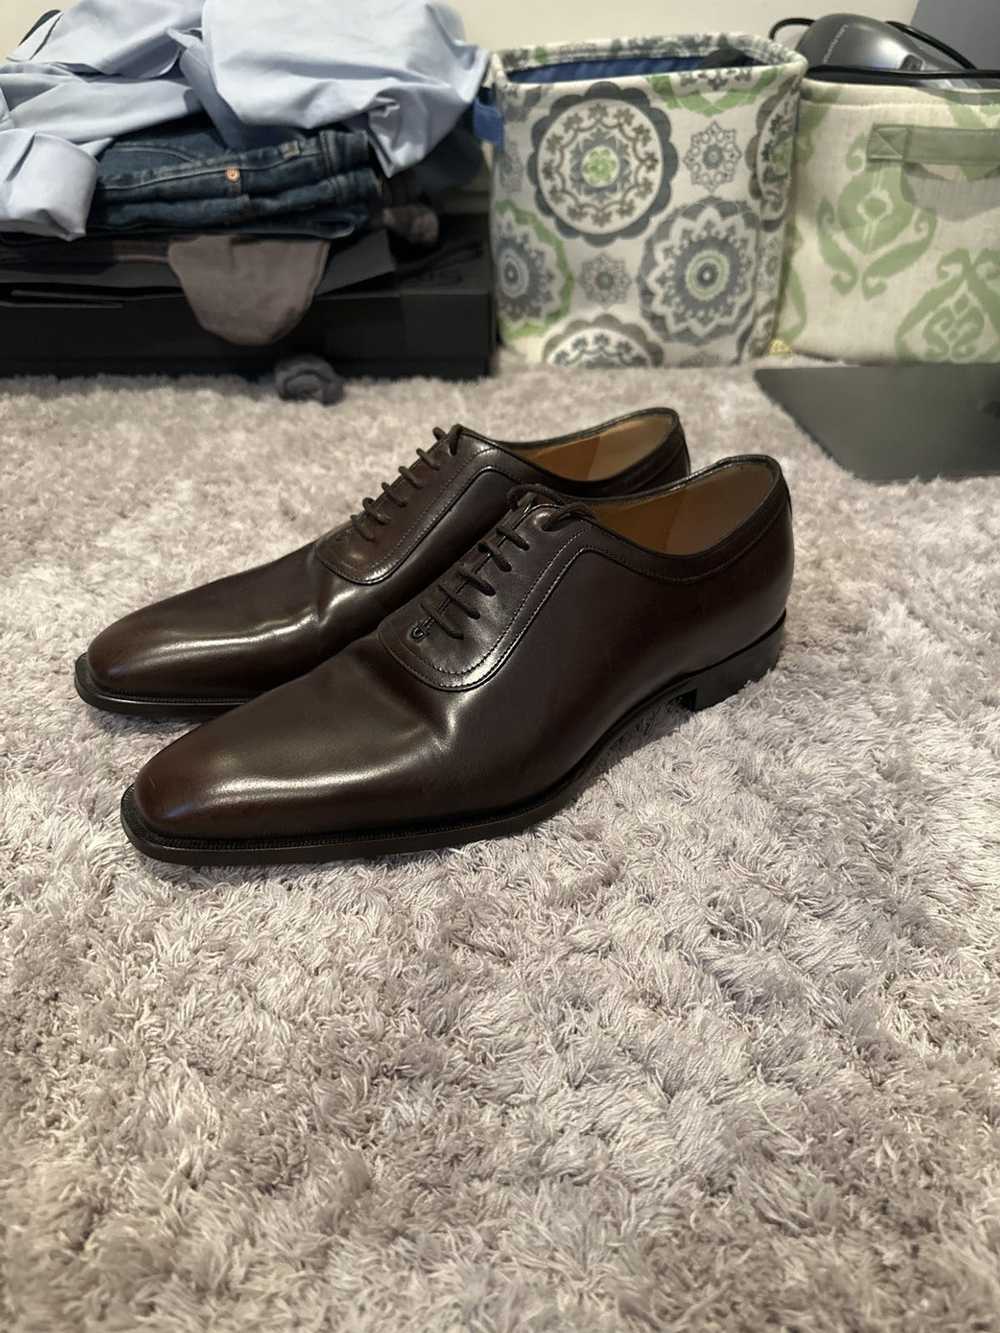 Gucci Gucci Oxford Dress Shoe Brown Leather - image 3